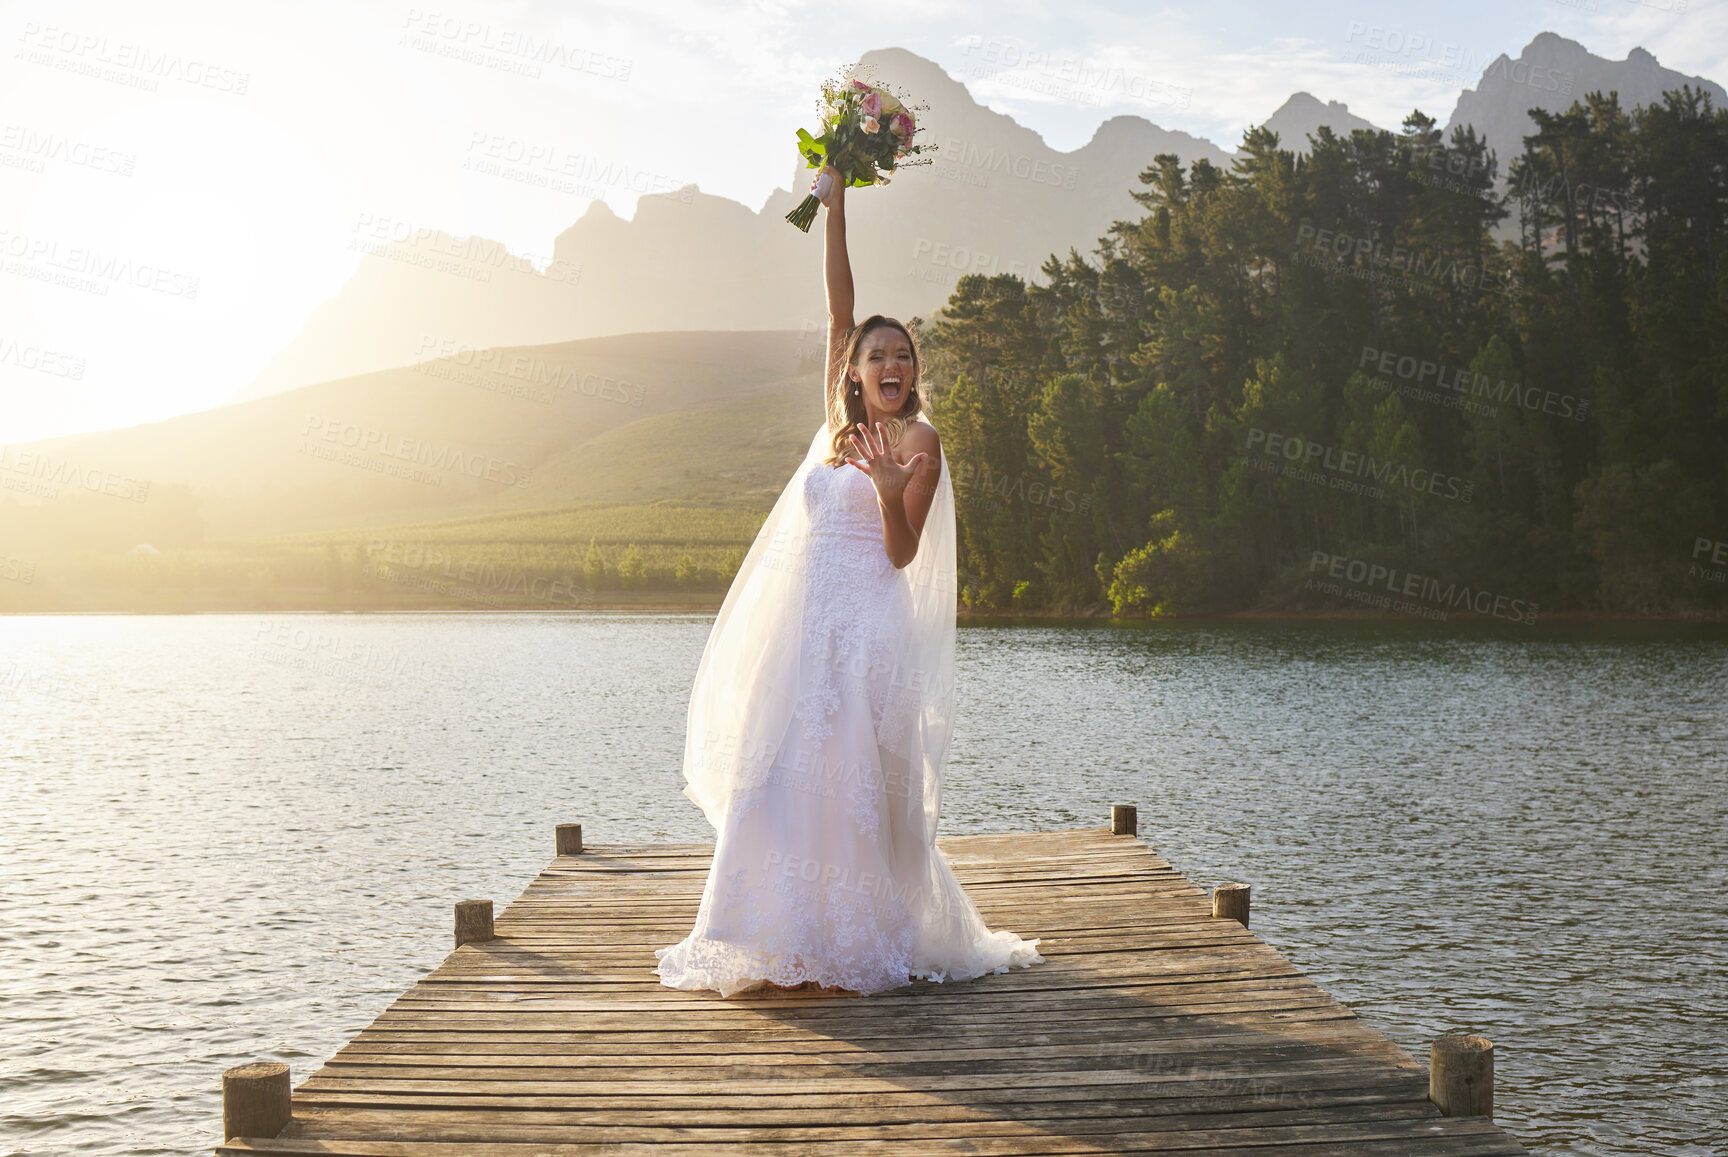 Buy stock photo Wedding, bouquet and celebration with a bride on a pier over a lake in nature after a marriage ceremony. Happy, smile and flowers with a woman celebrating being married in the tradition of matrimony